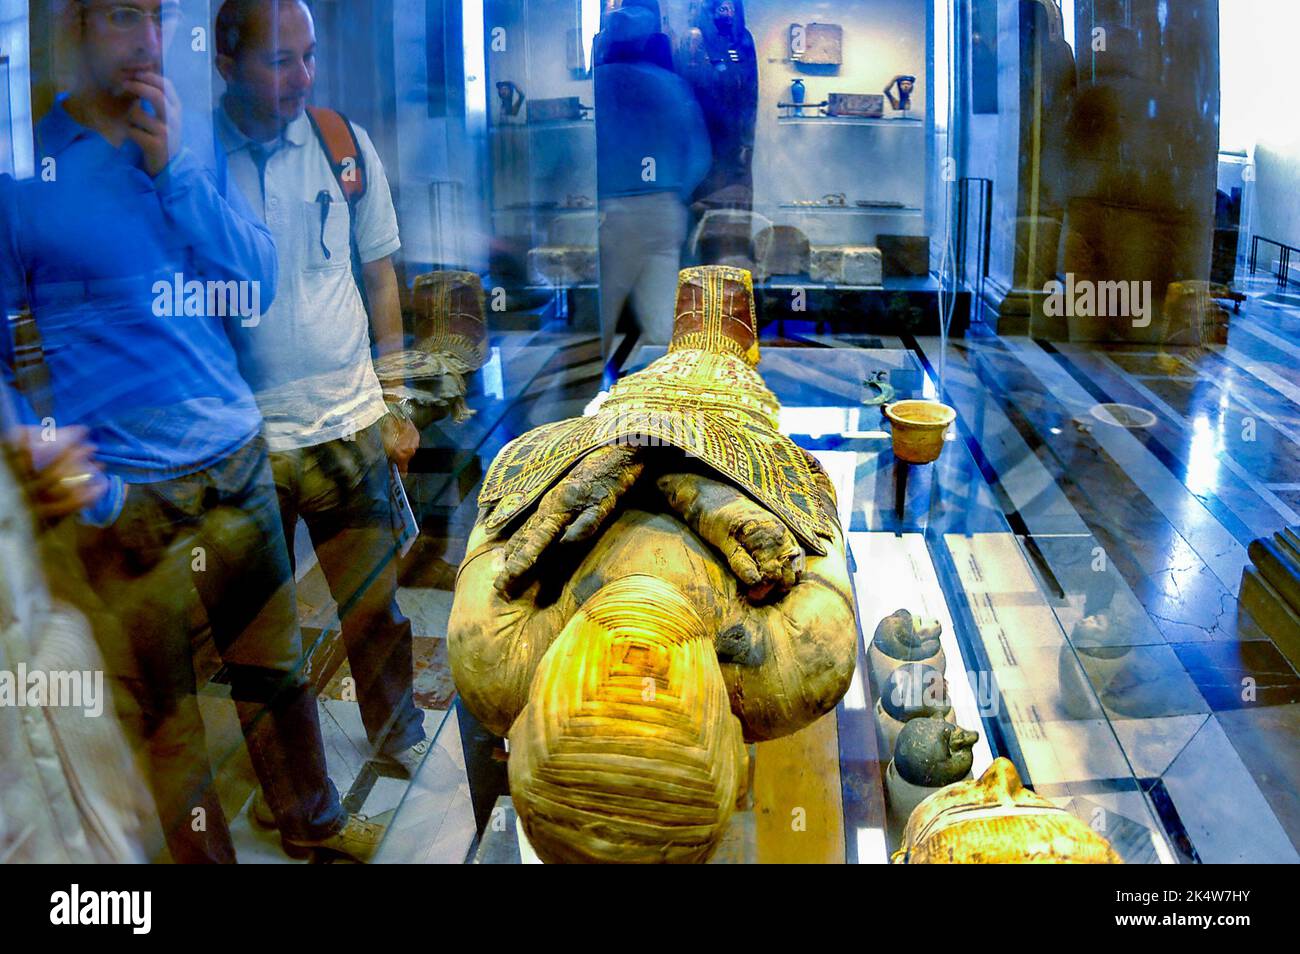 PARIS, France  - Tourists in Louvre Museum, Egyptian Dept. Collection, Looking at an Ancient Mummy. on display in Case Stock Photo